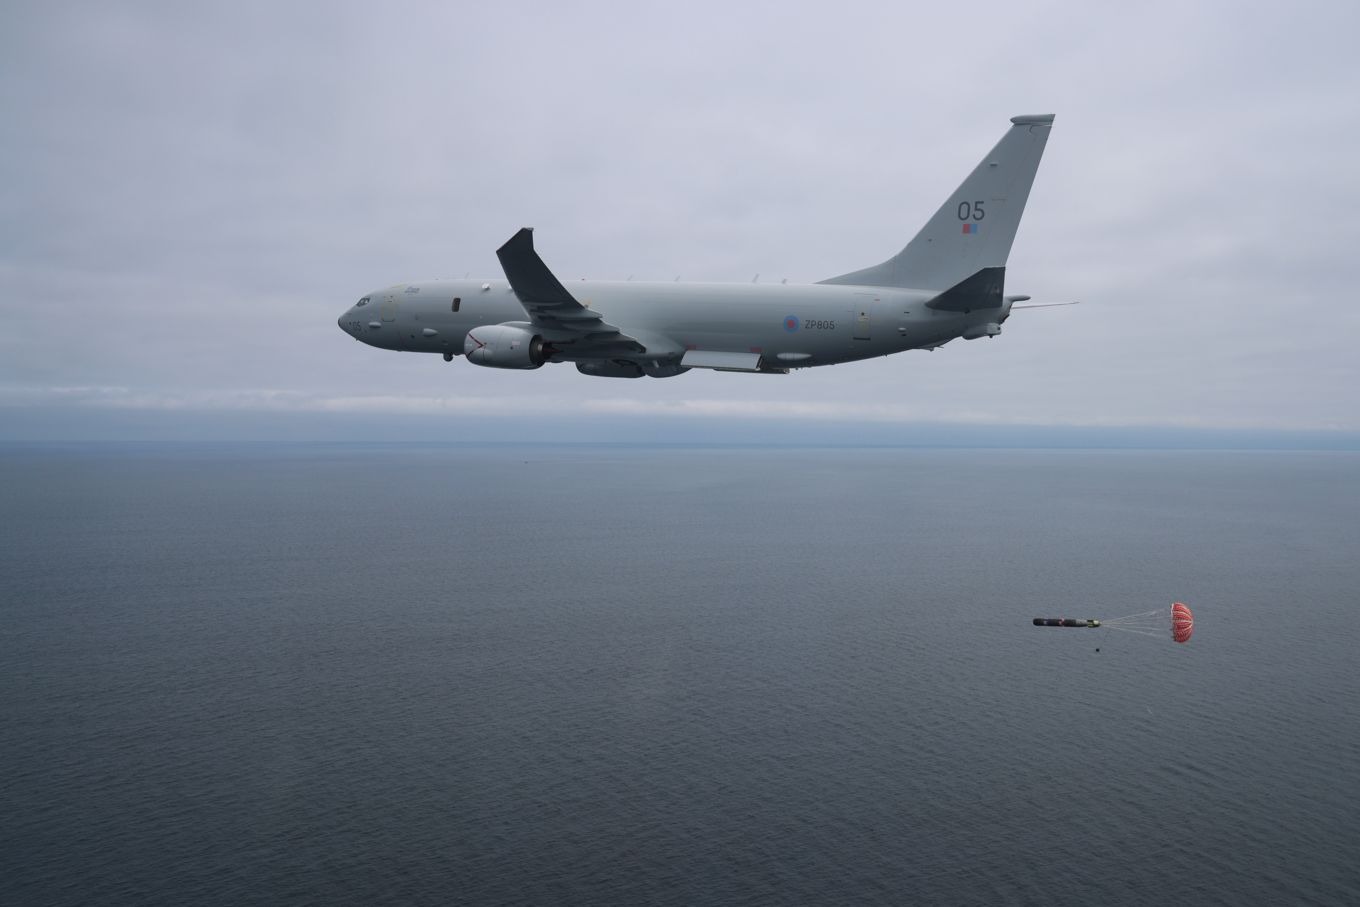 Royal Air Force P-8A Poseidon Maritime Patrol Aircraft Releases Torpedo for the First Time